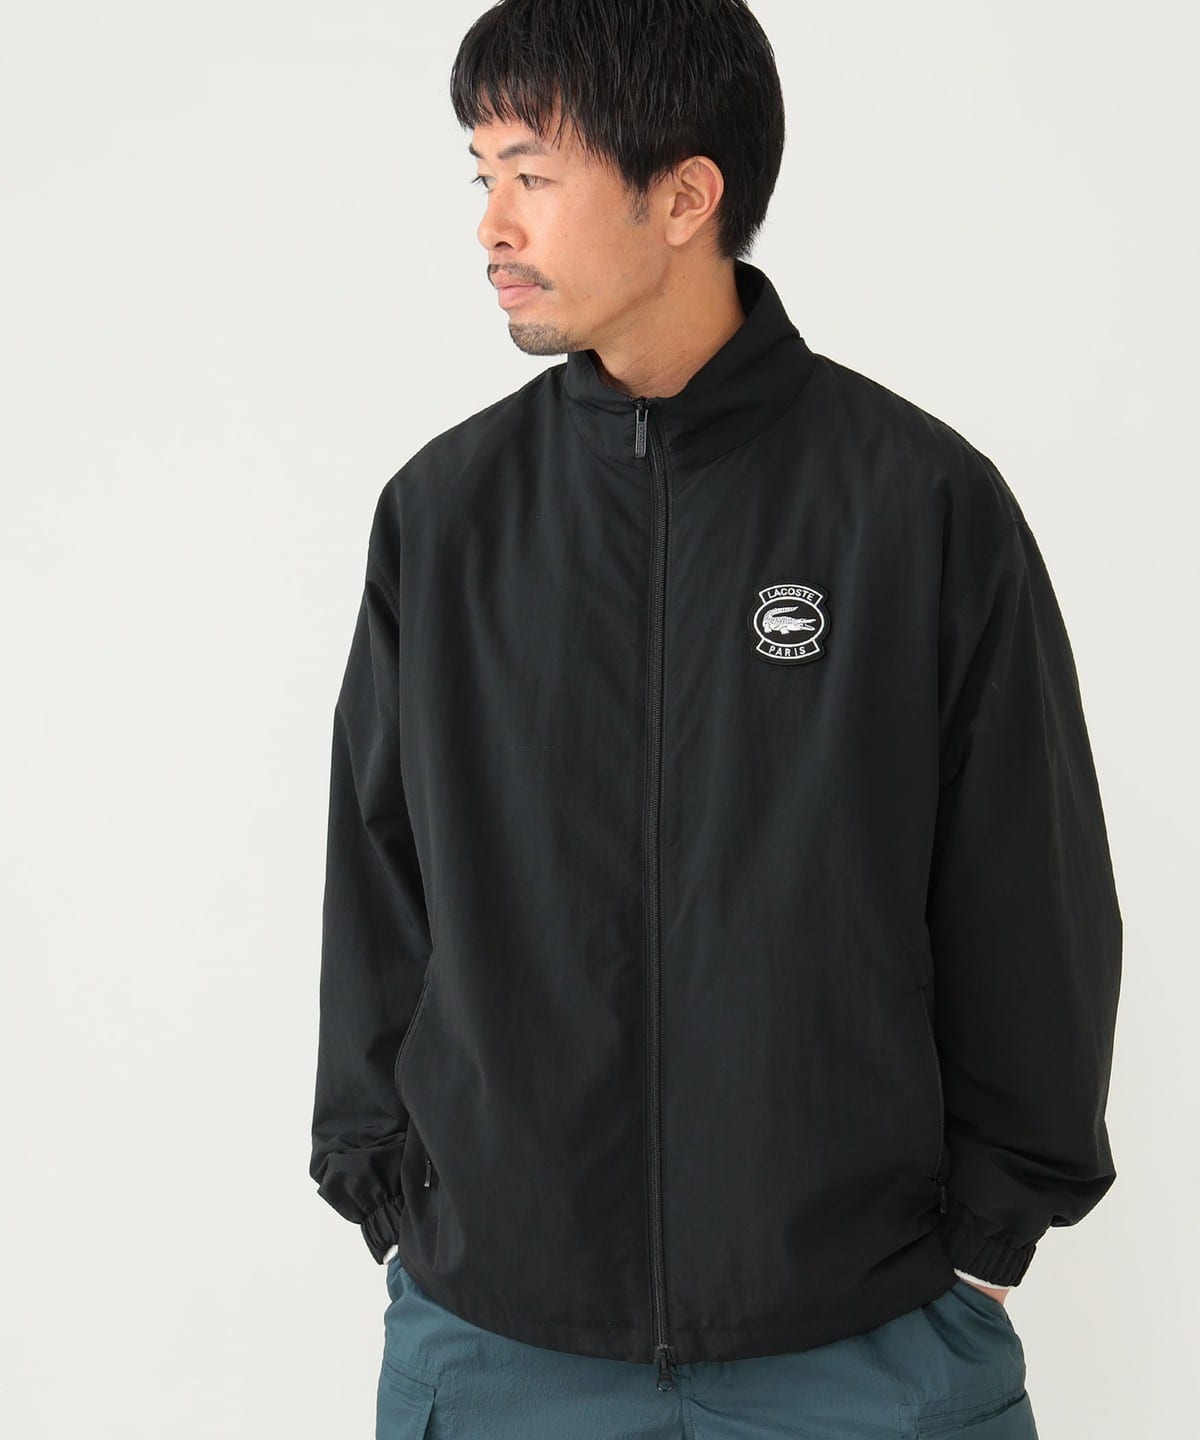 LACOSTE for BEAMS / Special order track jacket